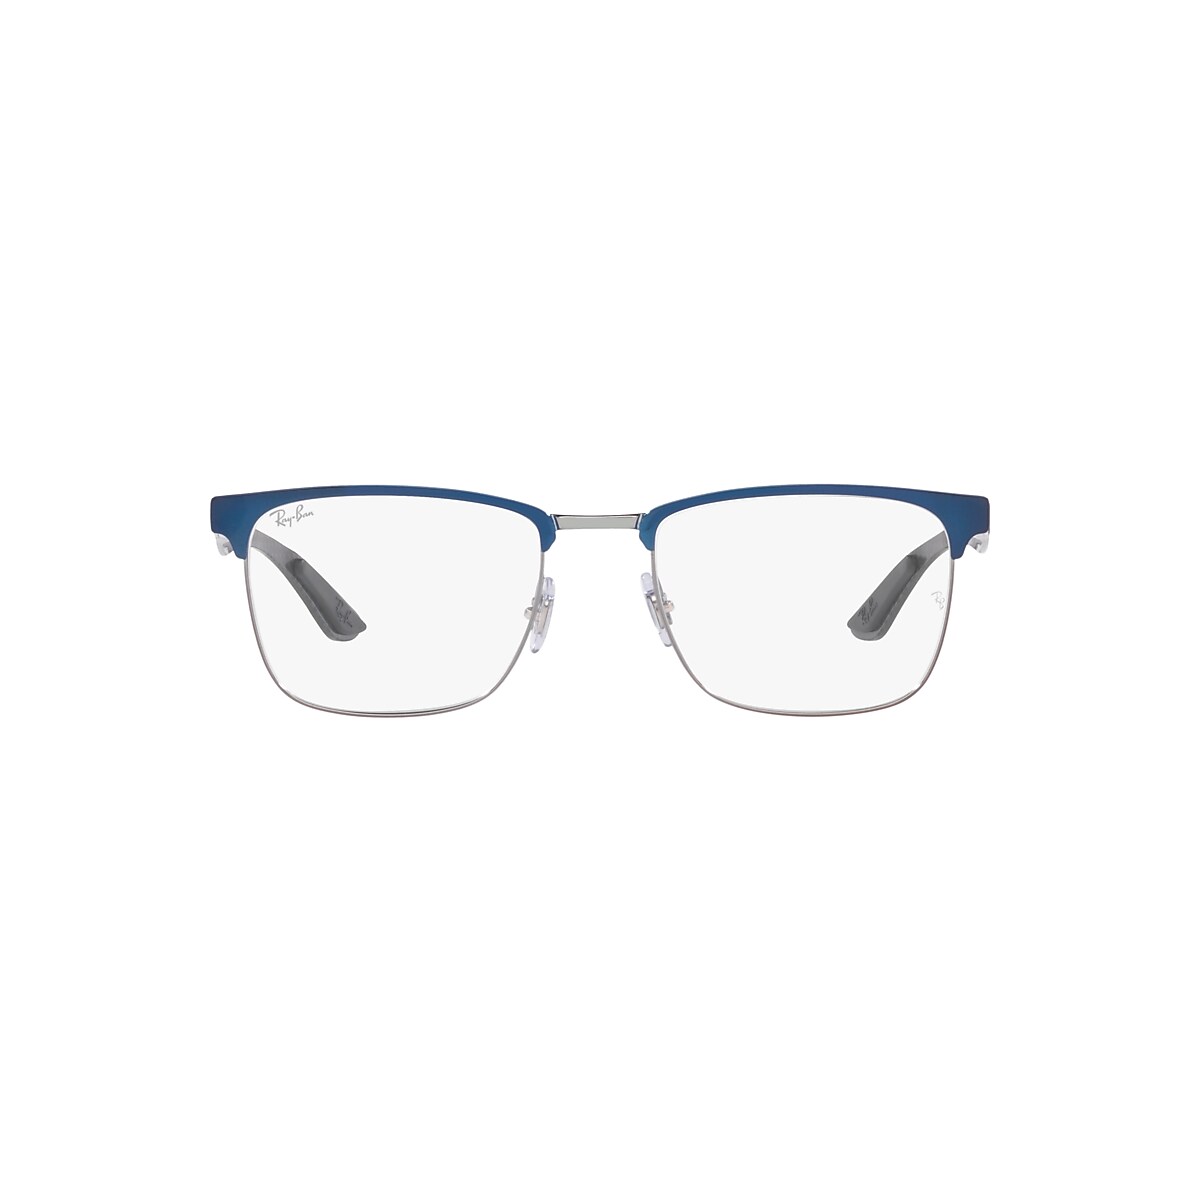 Ray-Ban 0RX8421 Glasses in Blue | Target Optical